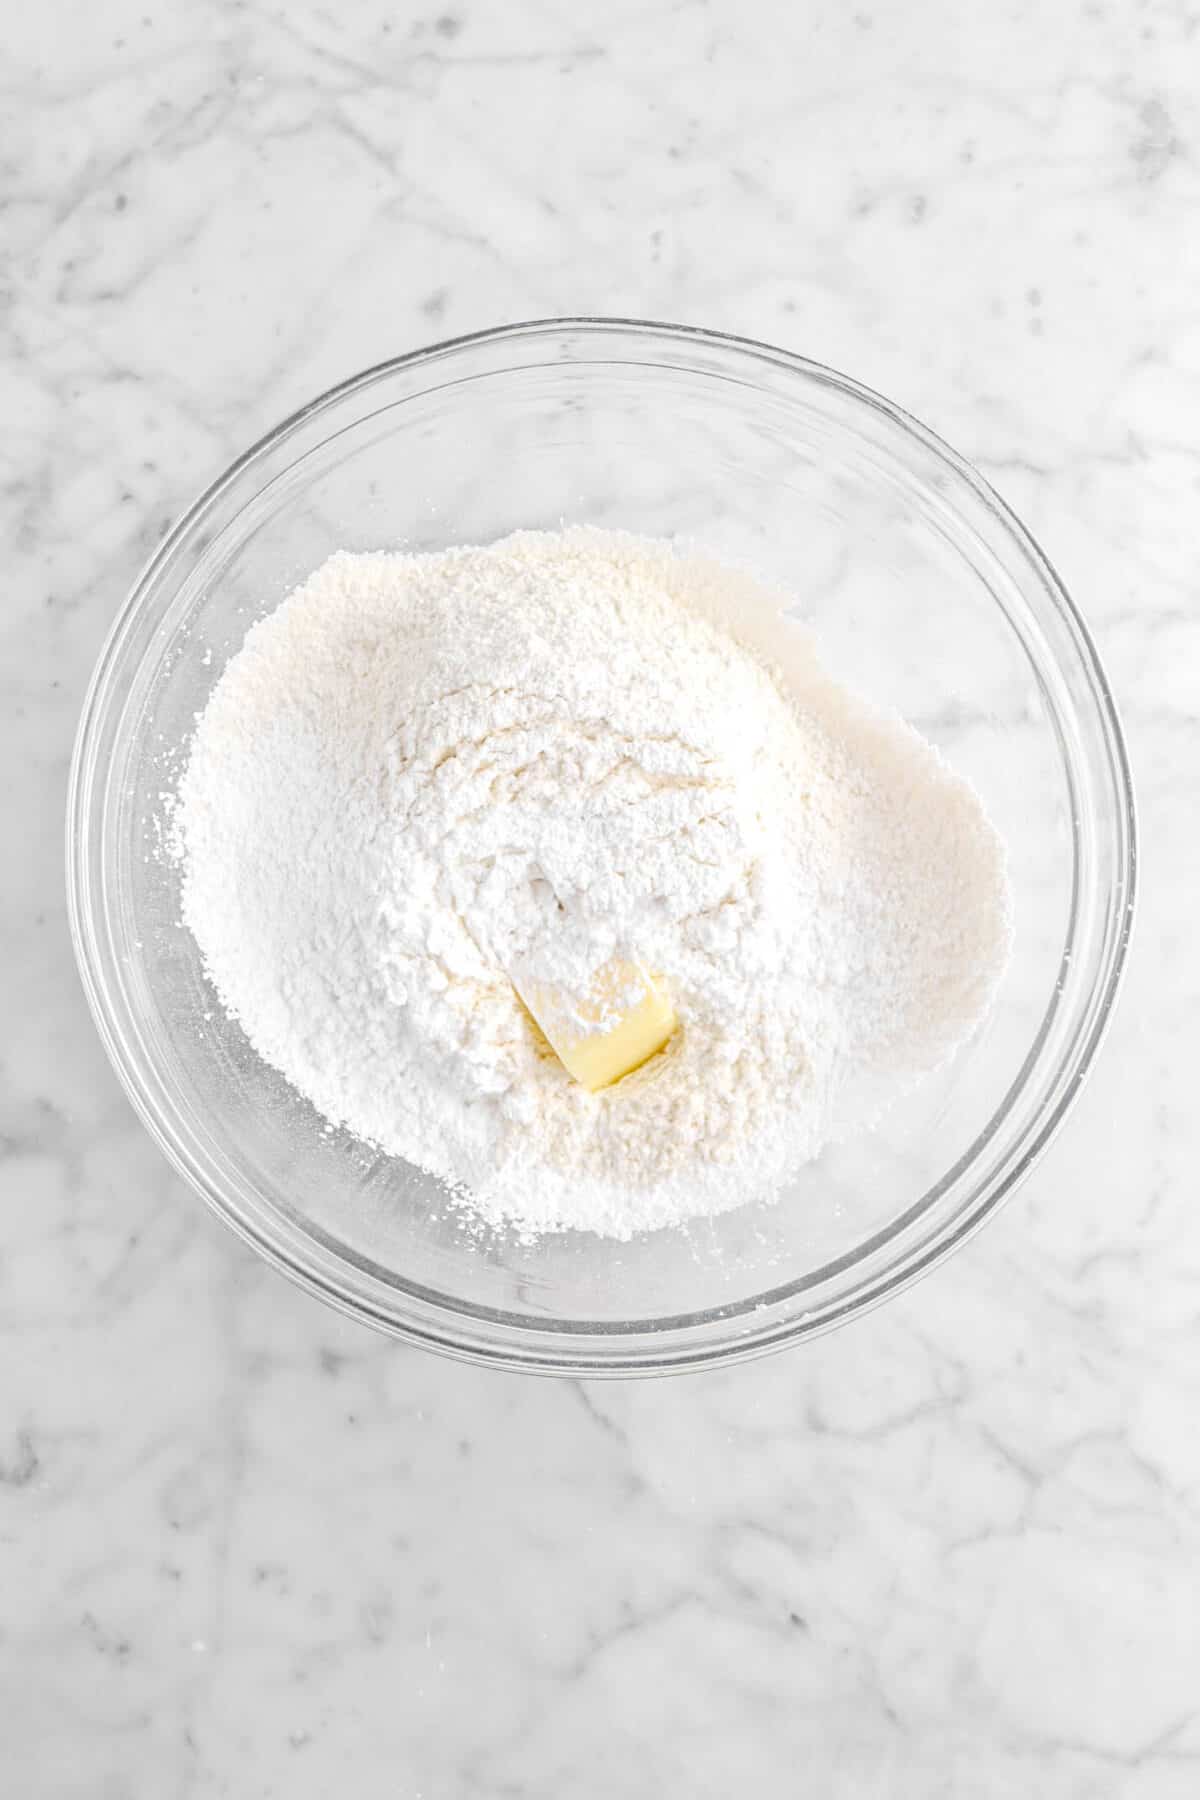 butter added to powdered sugar and flour